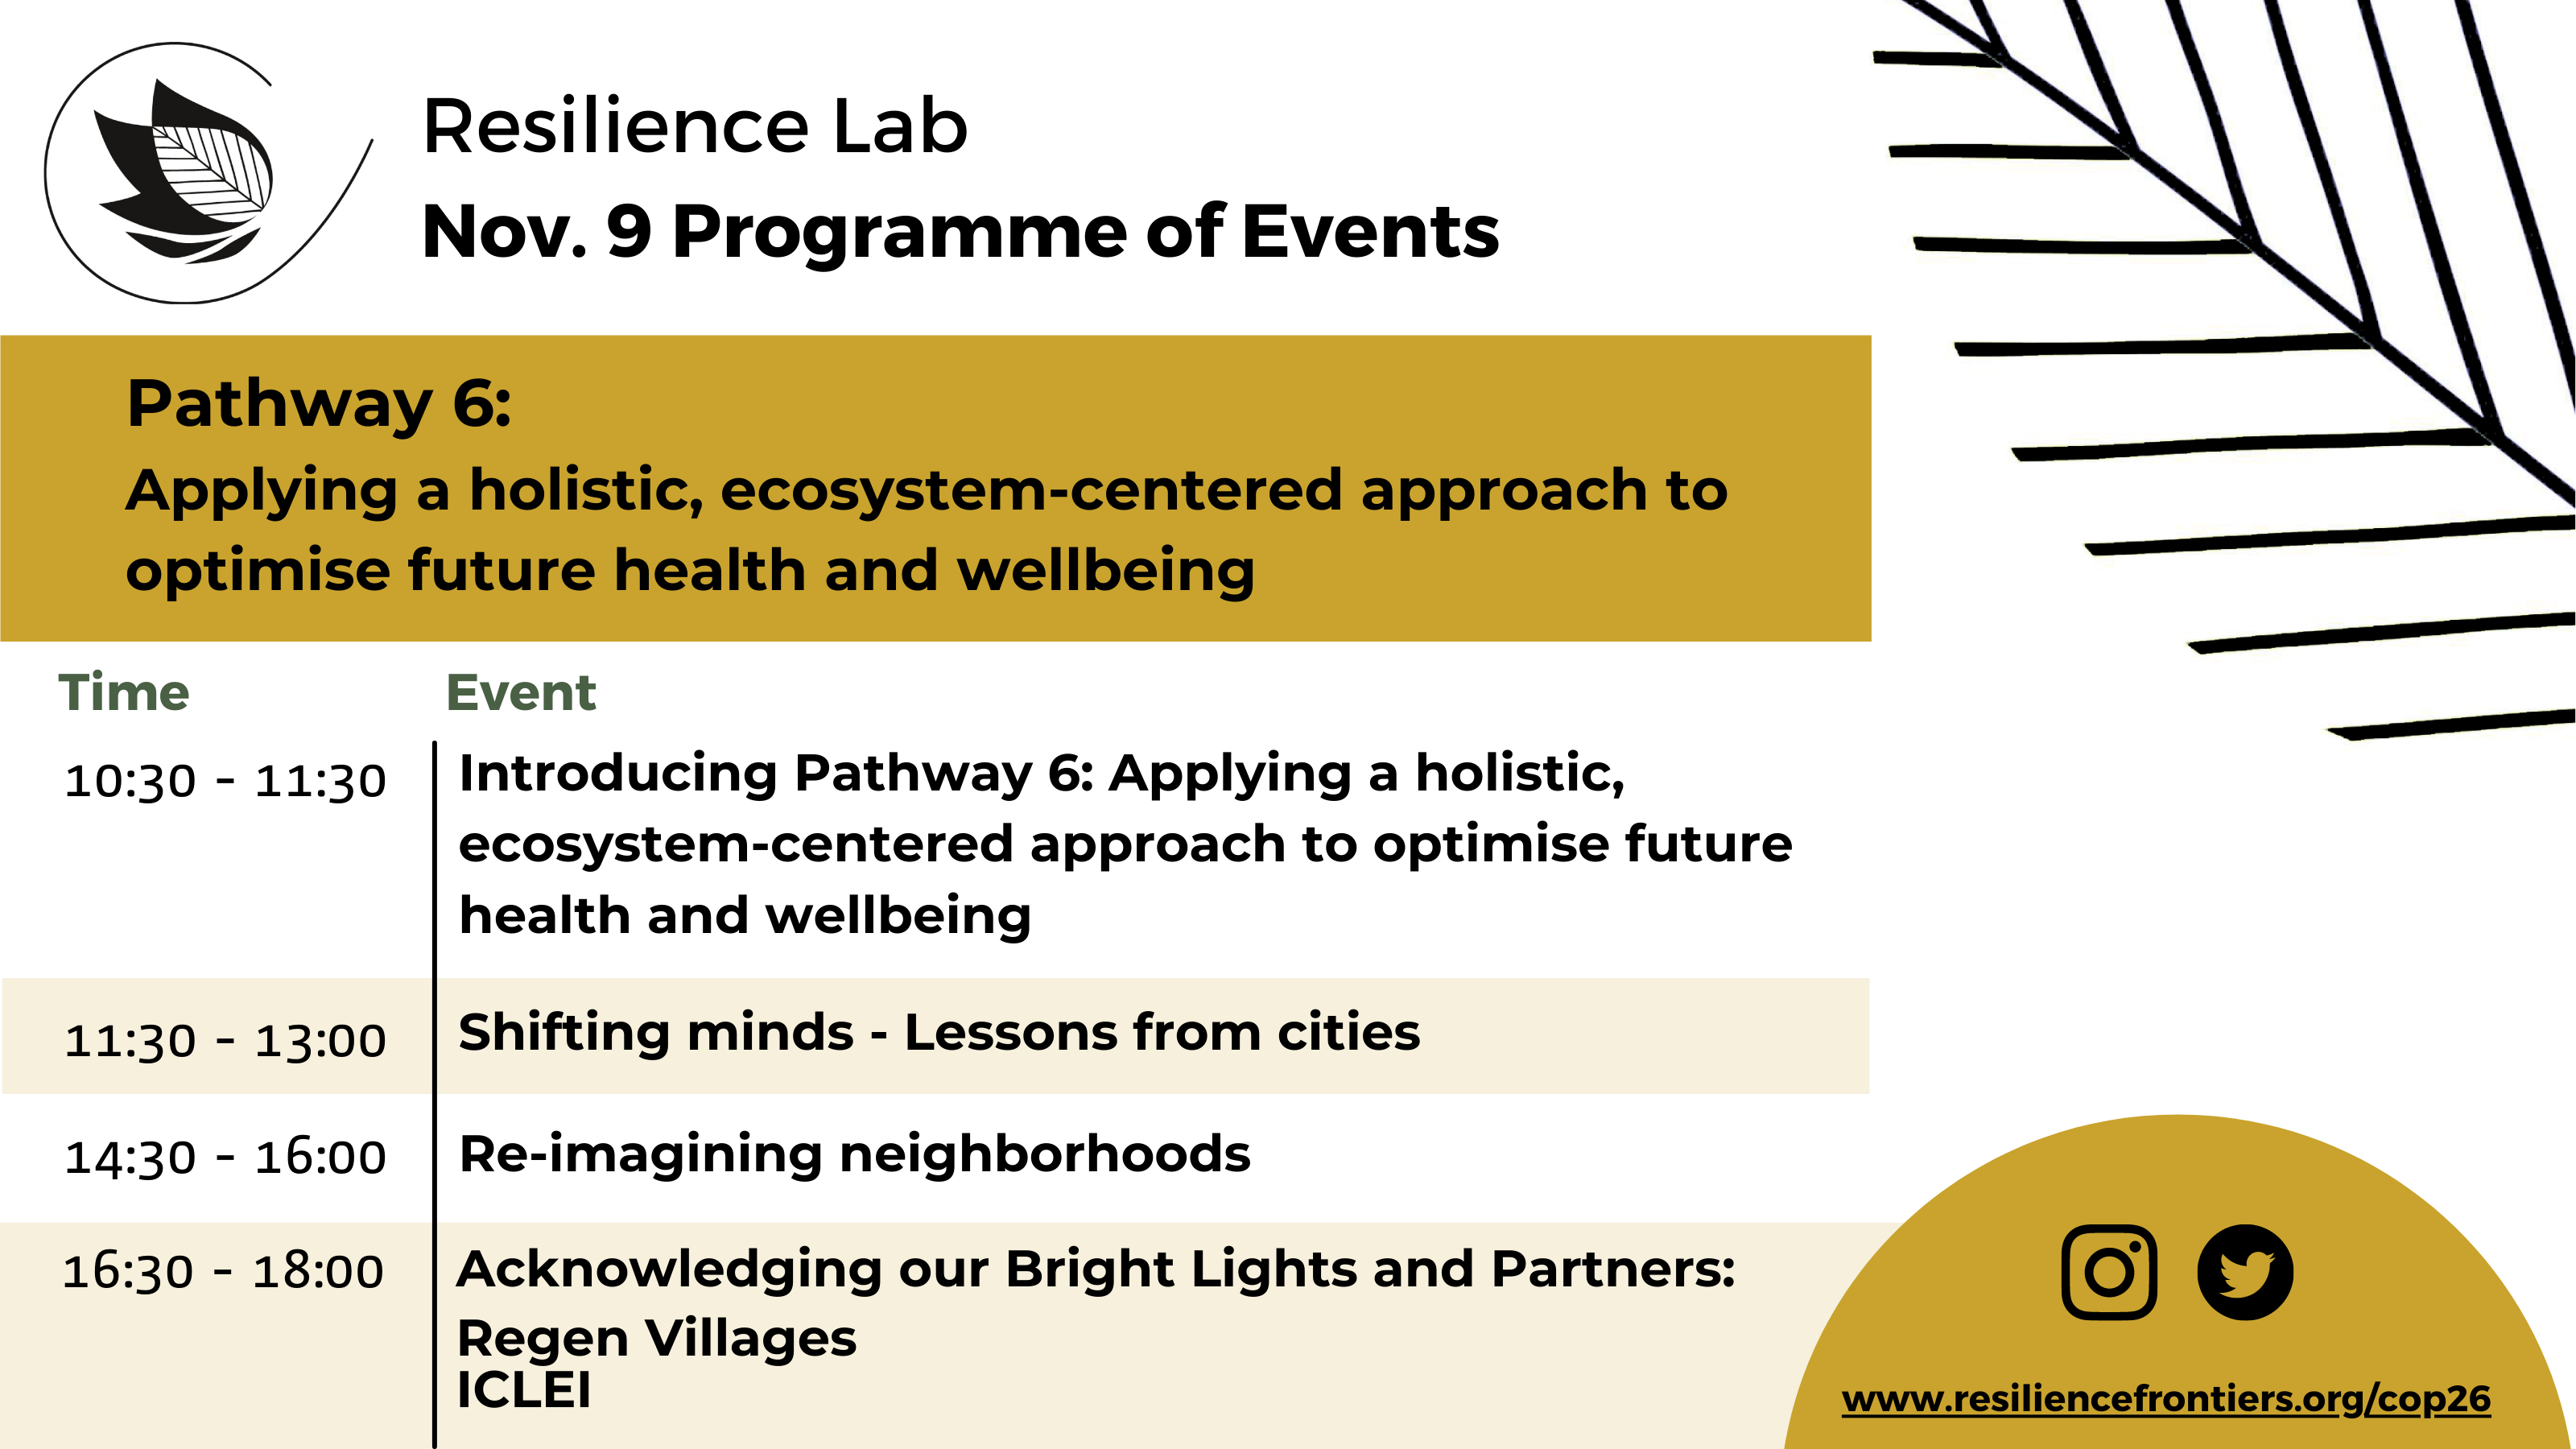 Resilience Lab Day 7 Programme of Events